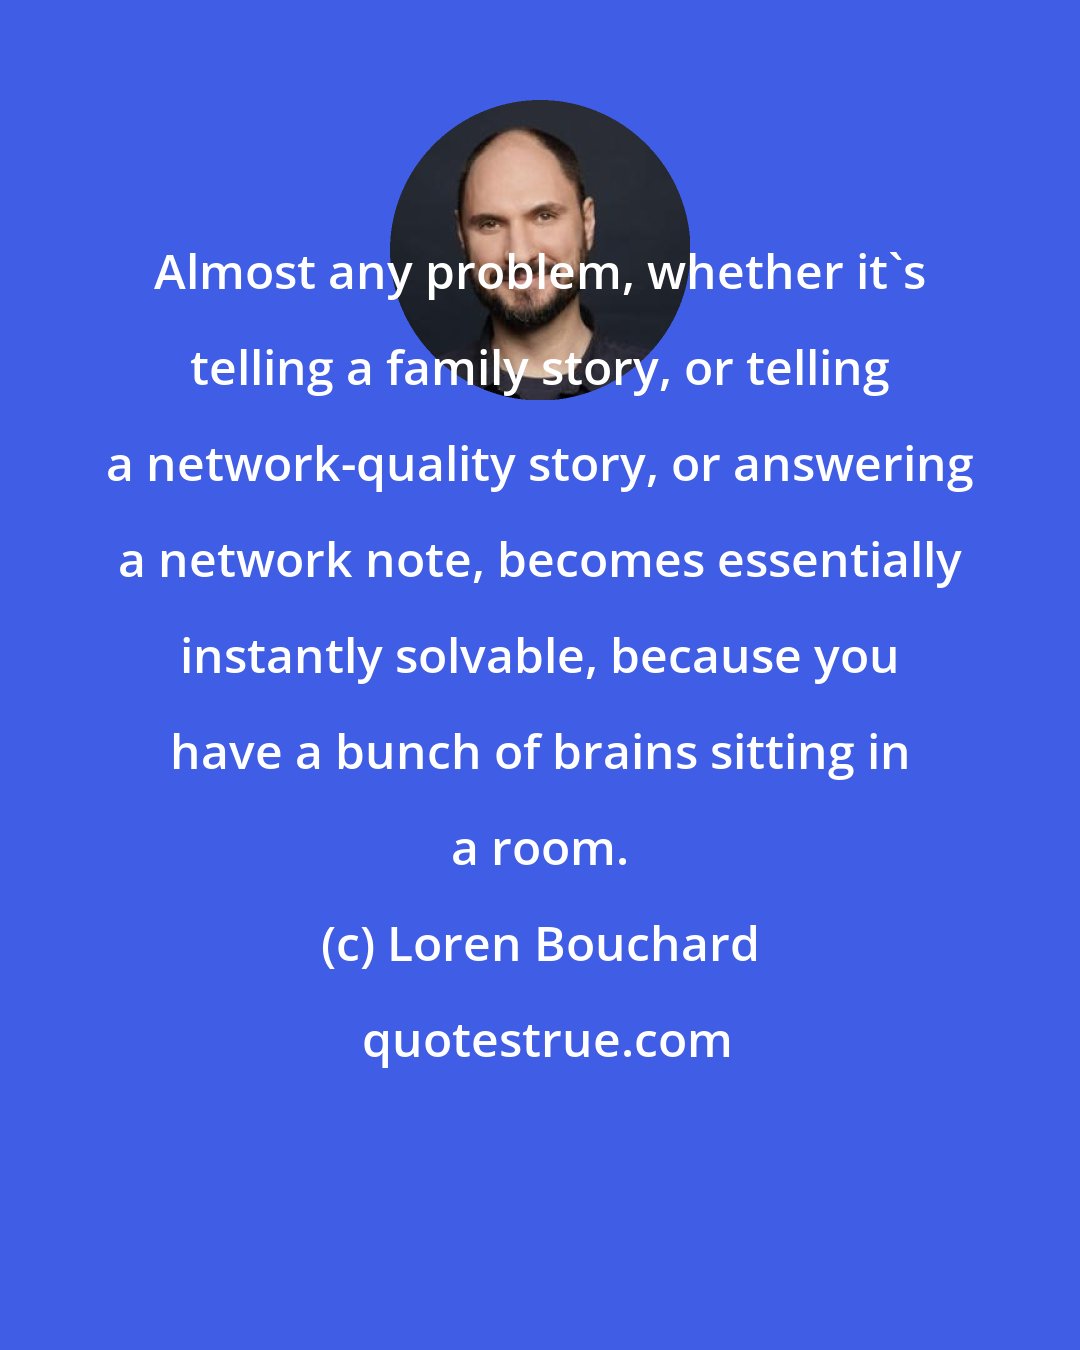 Loren Bouchard: Almost any problem, whether it's telling a family story, or telling a network-quality story, or answering a network note, becomes essentially instantly solvable, because you have a bunch of brains sitting in a room.